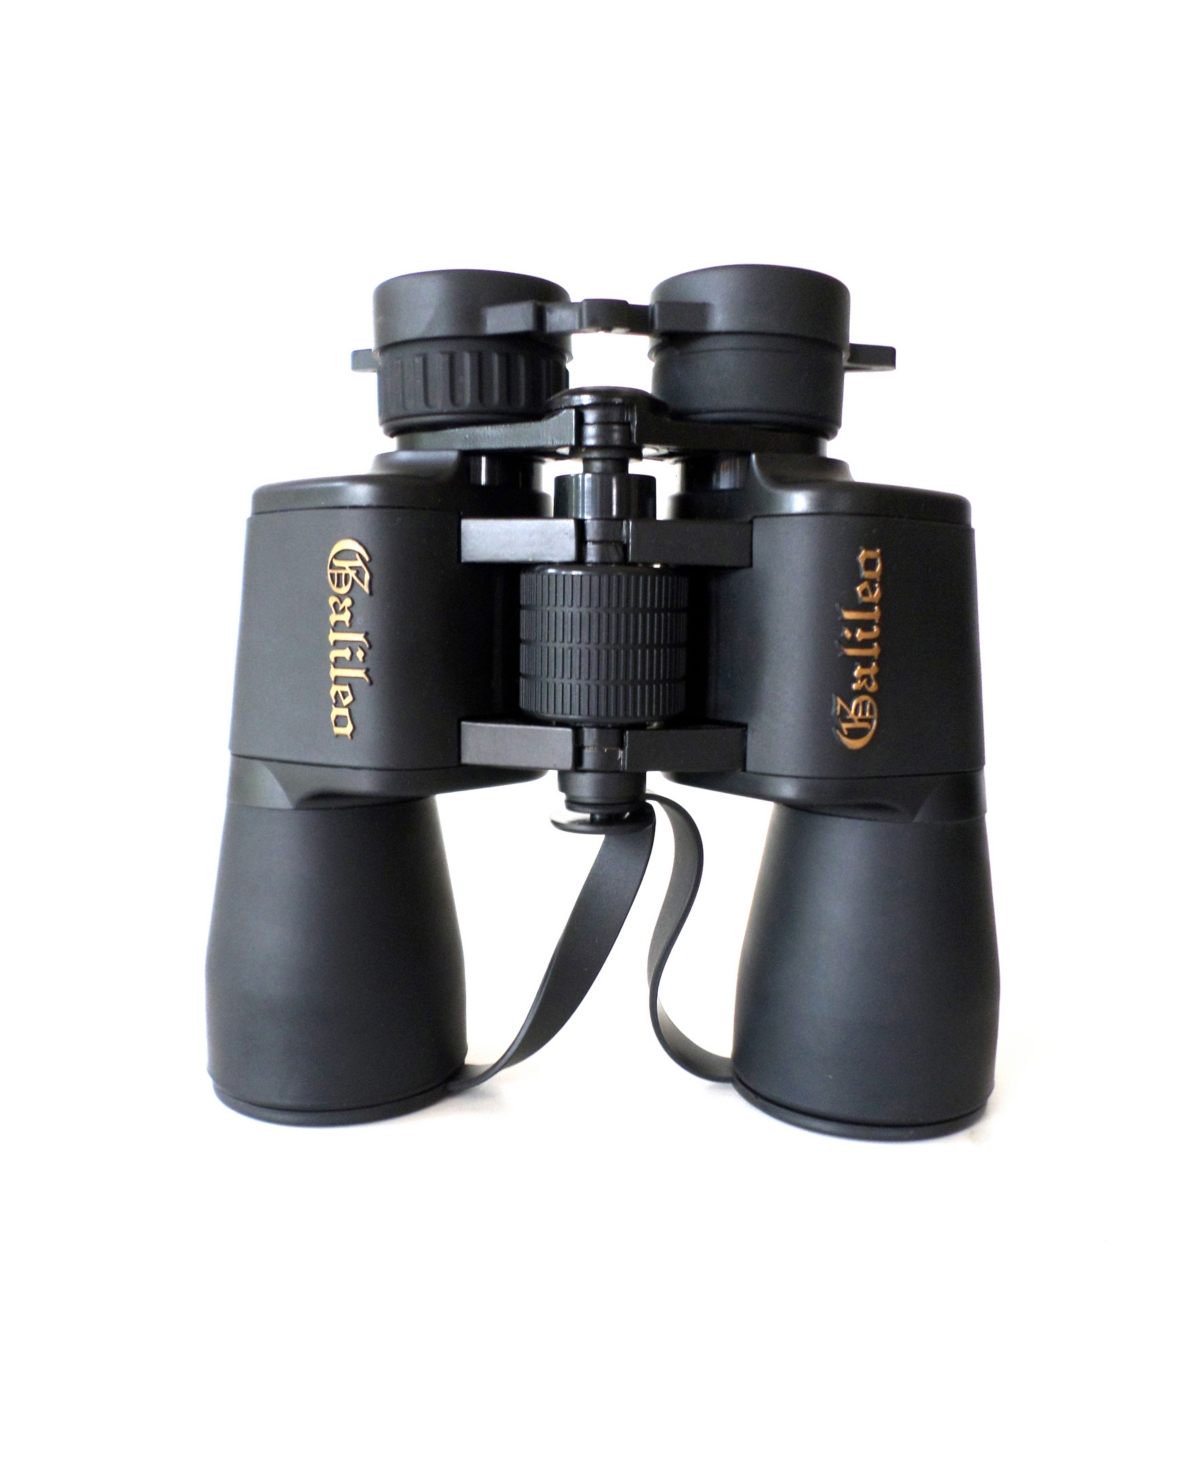 Shop Cosmo Brands Galileo 16 Power Astronomical Binocular With 50mm Lenses, Tripod Socket And Case In Black